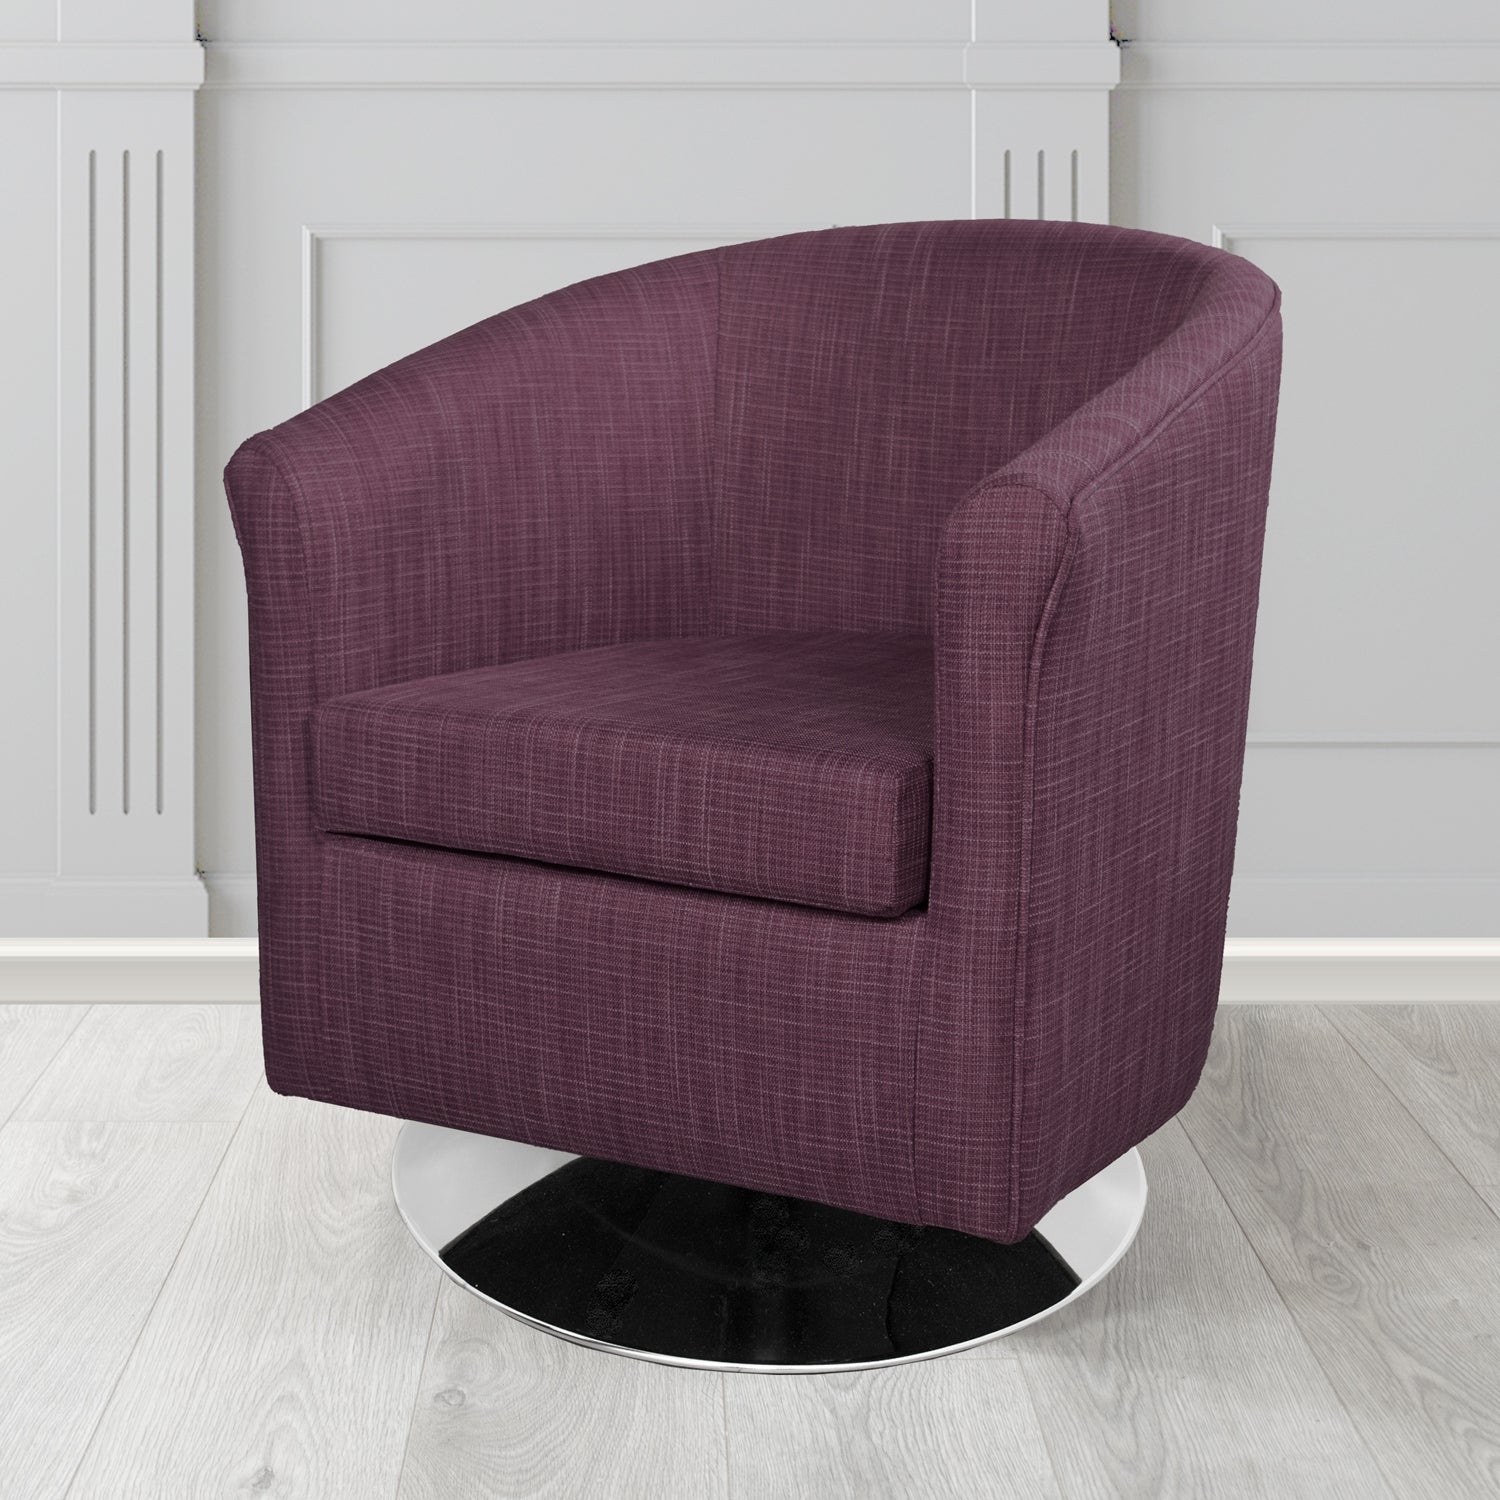 Tuscany Ravel Chianti Contract Crib 5 Fabric Swivel Tub Chair - Antimicrobial & Water-Resistant - The Tub Chair Shop